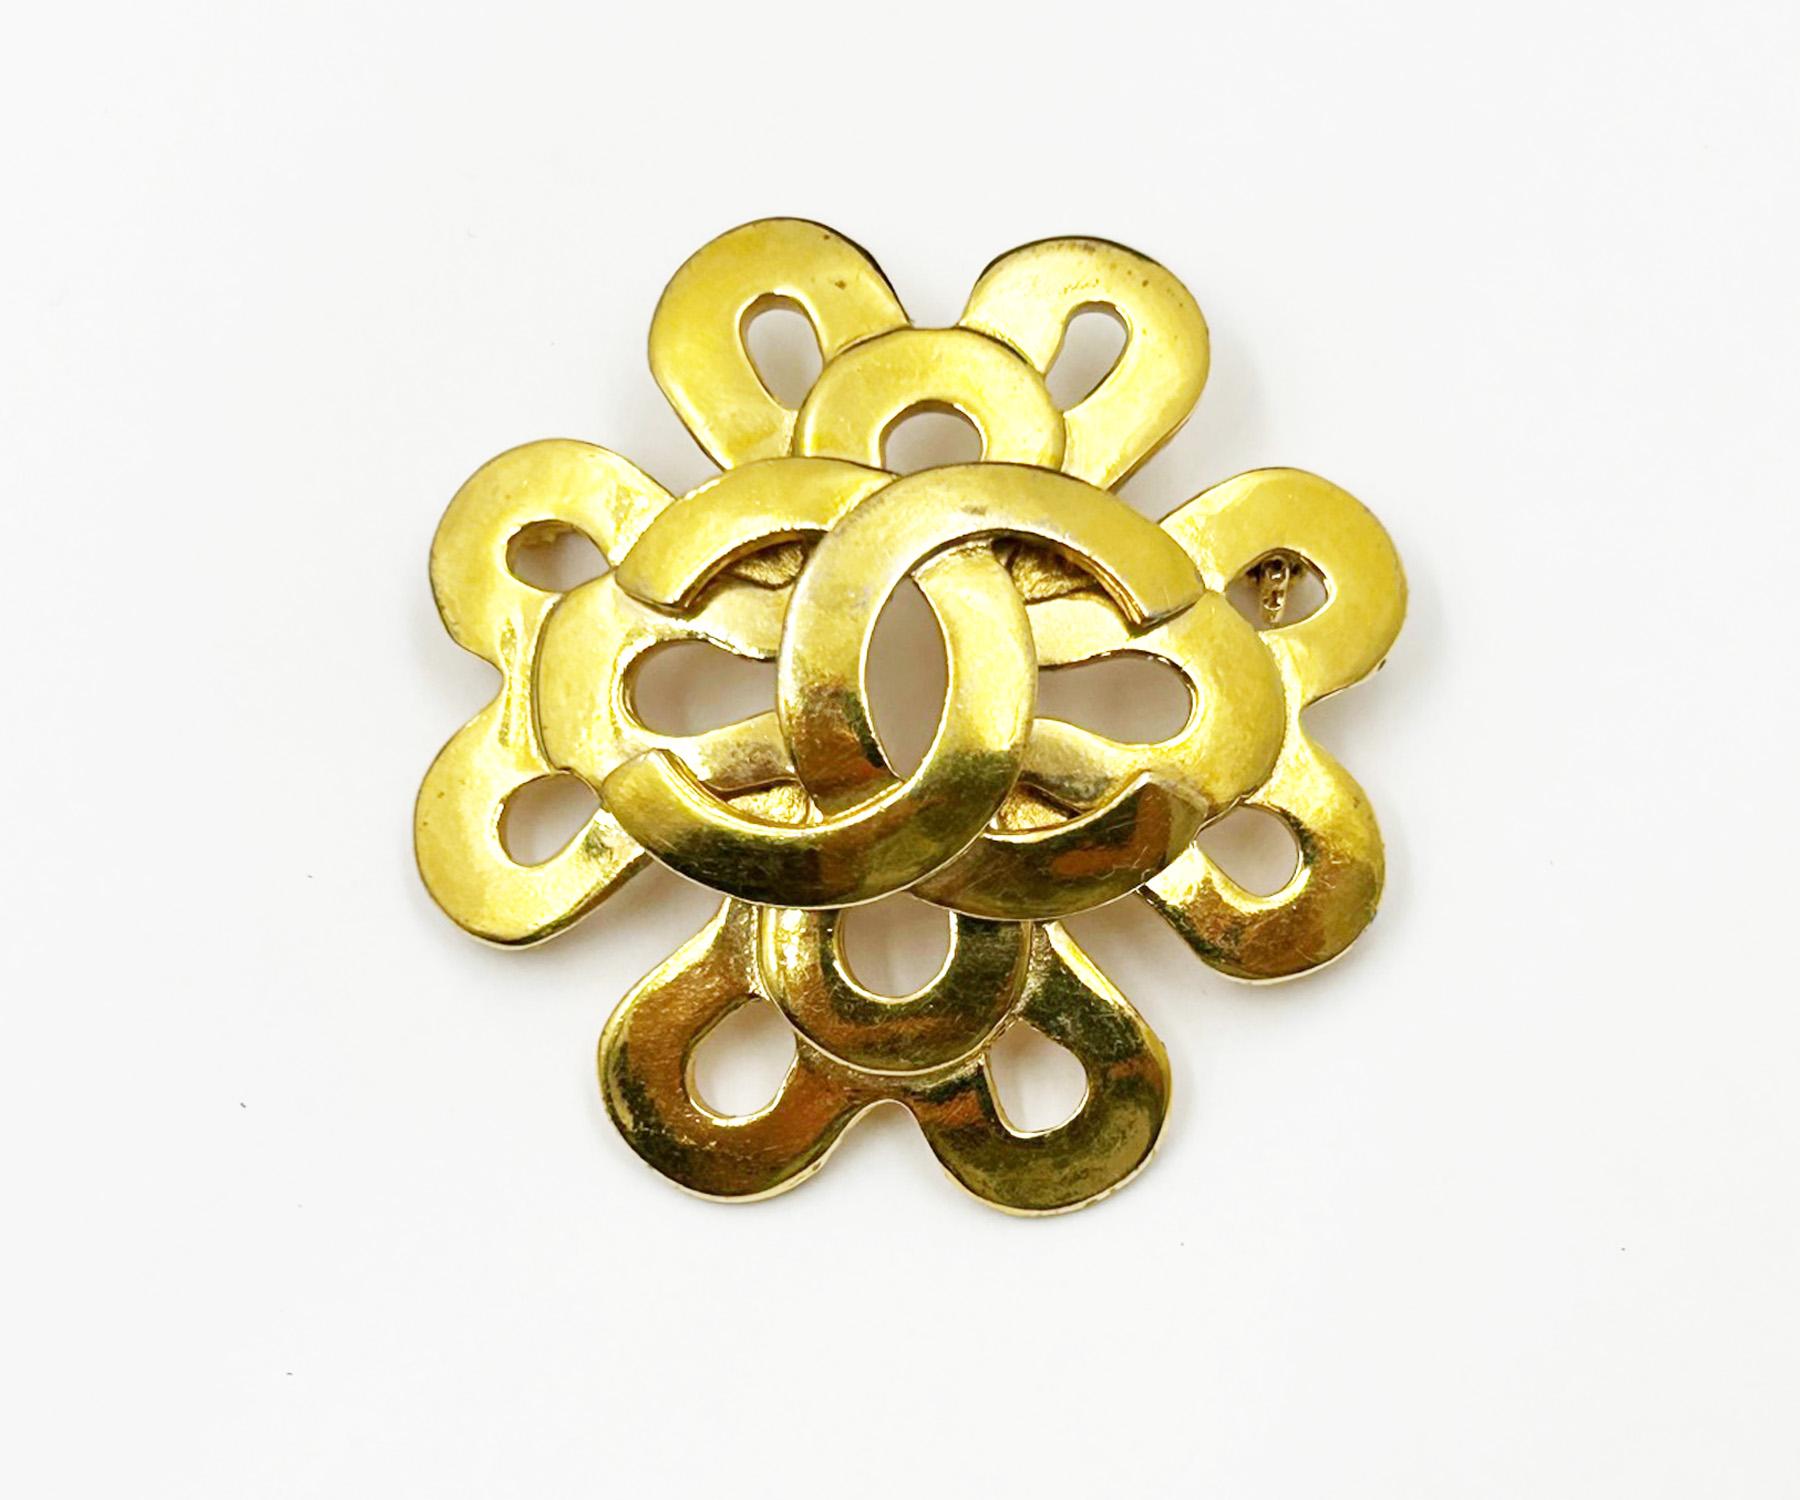 Chanel Vintage Gold Plated CC Twisted Flower Brooch

*Marked 95
*Made in France
*Comes with the original box

-It is approximately 2